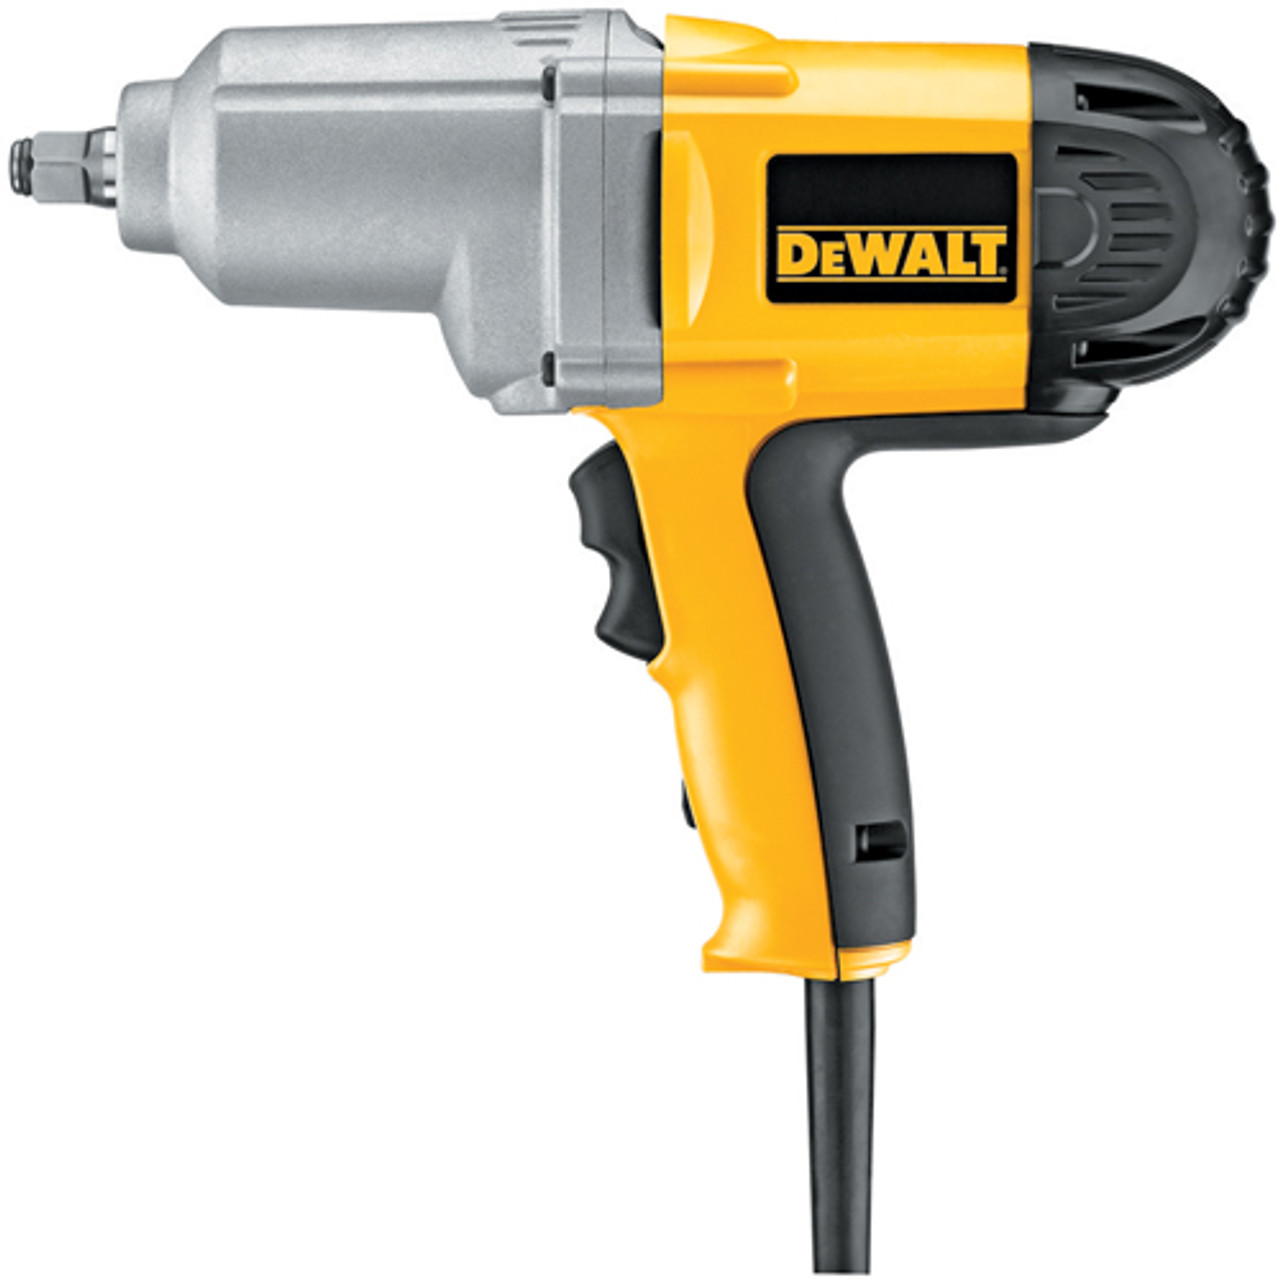 Dewalt DW293 1/2 In. (13mm) Impact Wrench With Hog Ring Anvil